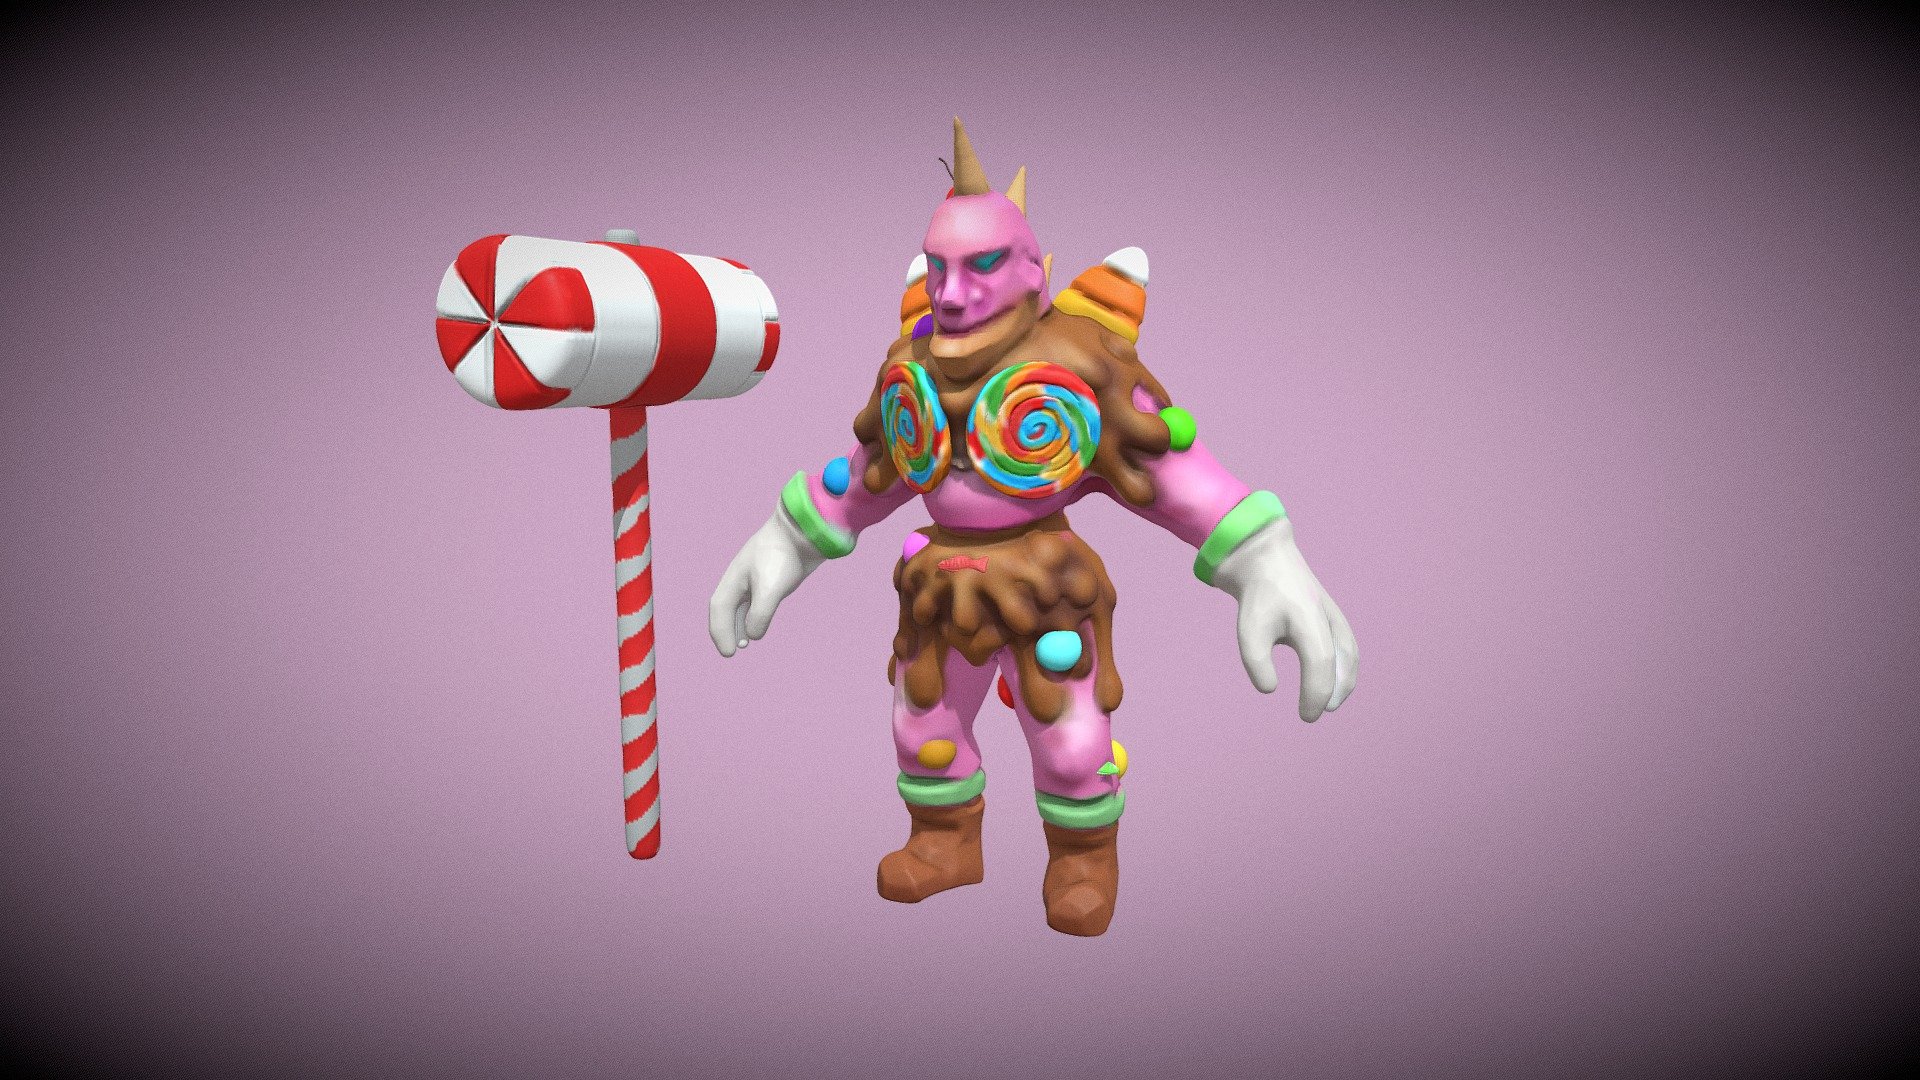 My entry for day 24 of sculptober sweet 3d model